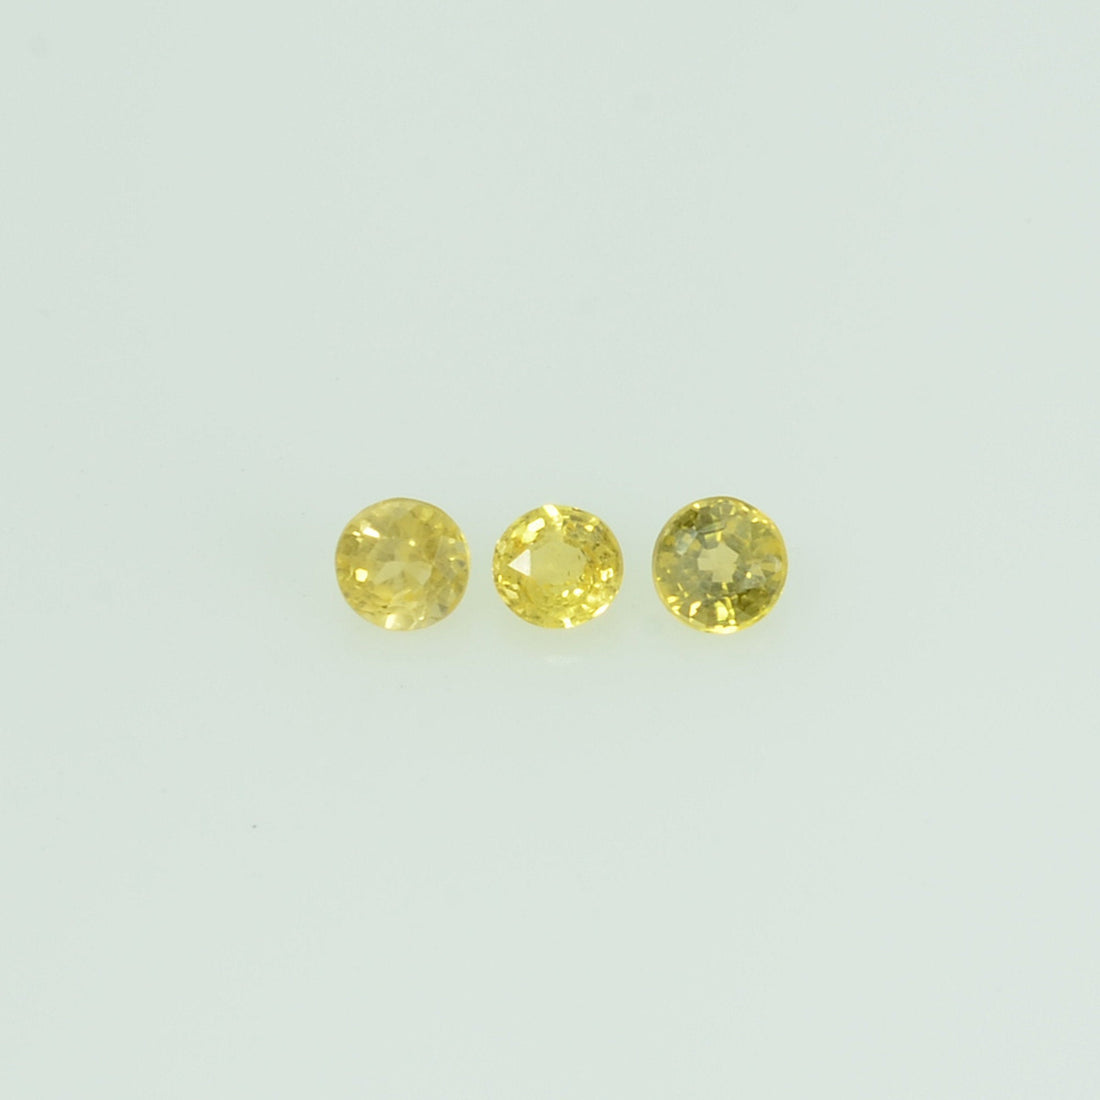 2.0 mm lot Natural Yellow Sapphire Loose Gemstone Round Cut